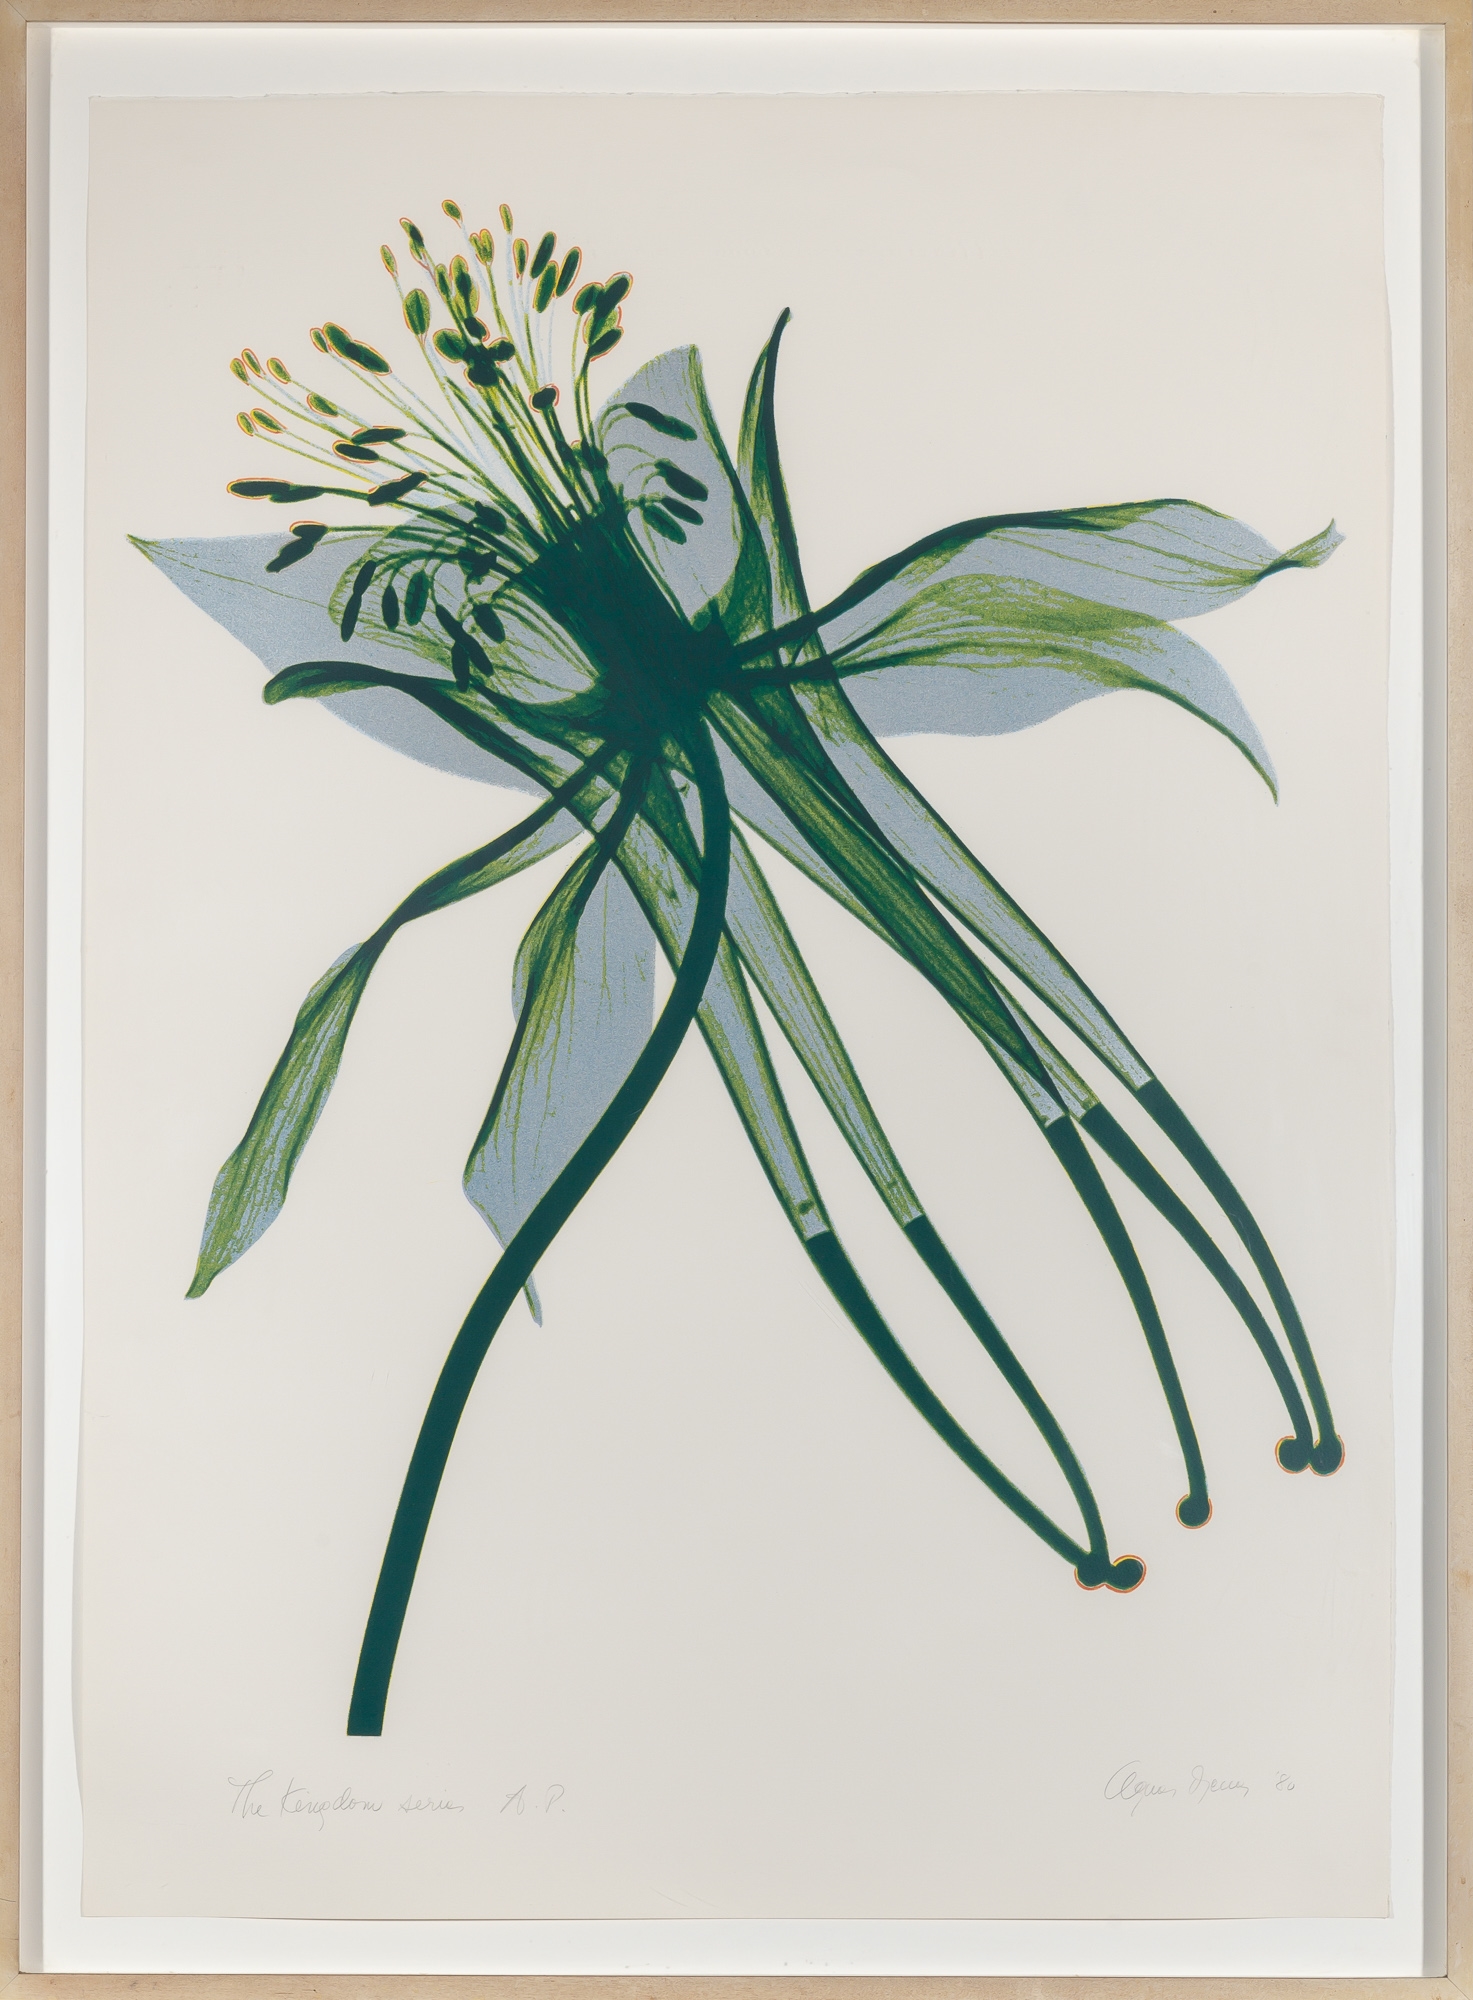 Artwork by Agnes Denes, [COLUMBINE], Made of Color lithograph and screenprint